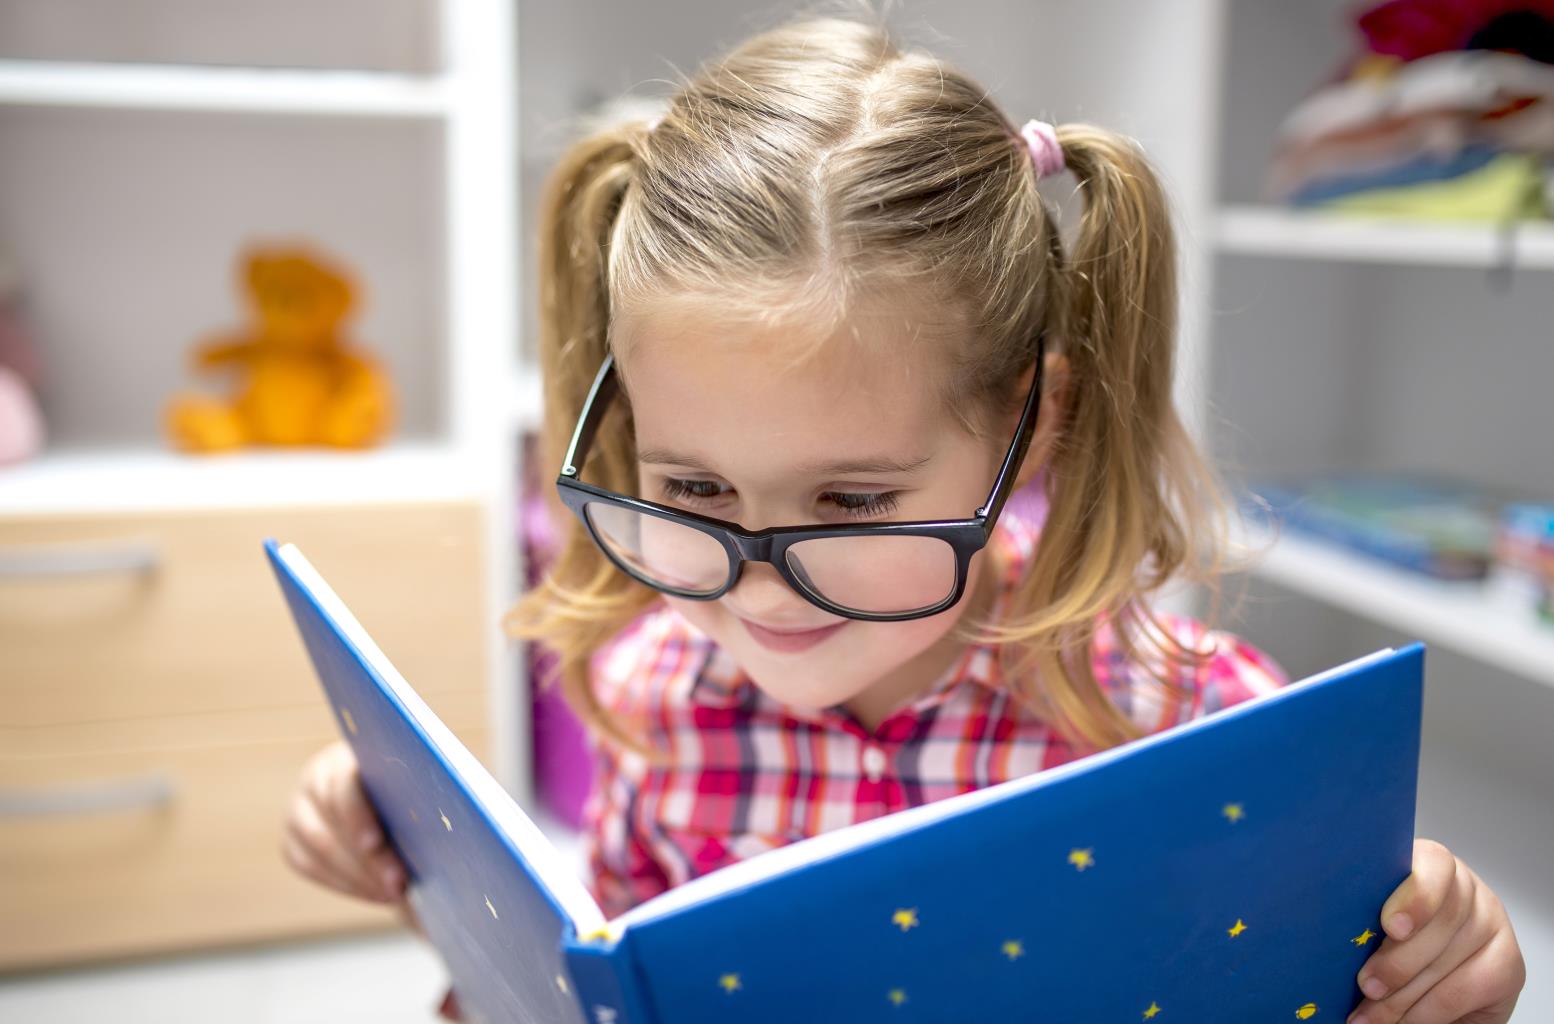 adorable_female_child_with_glasses_reading_interesting_book.jpg